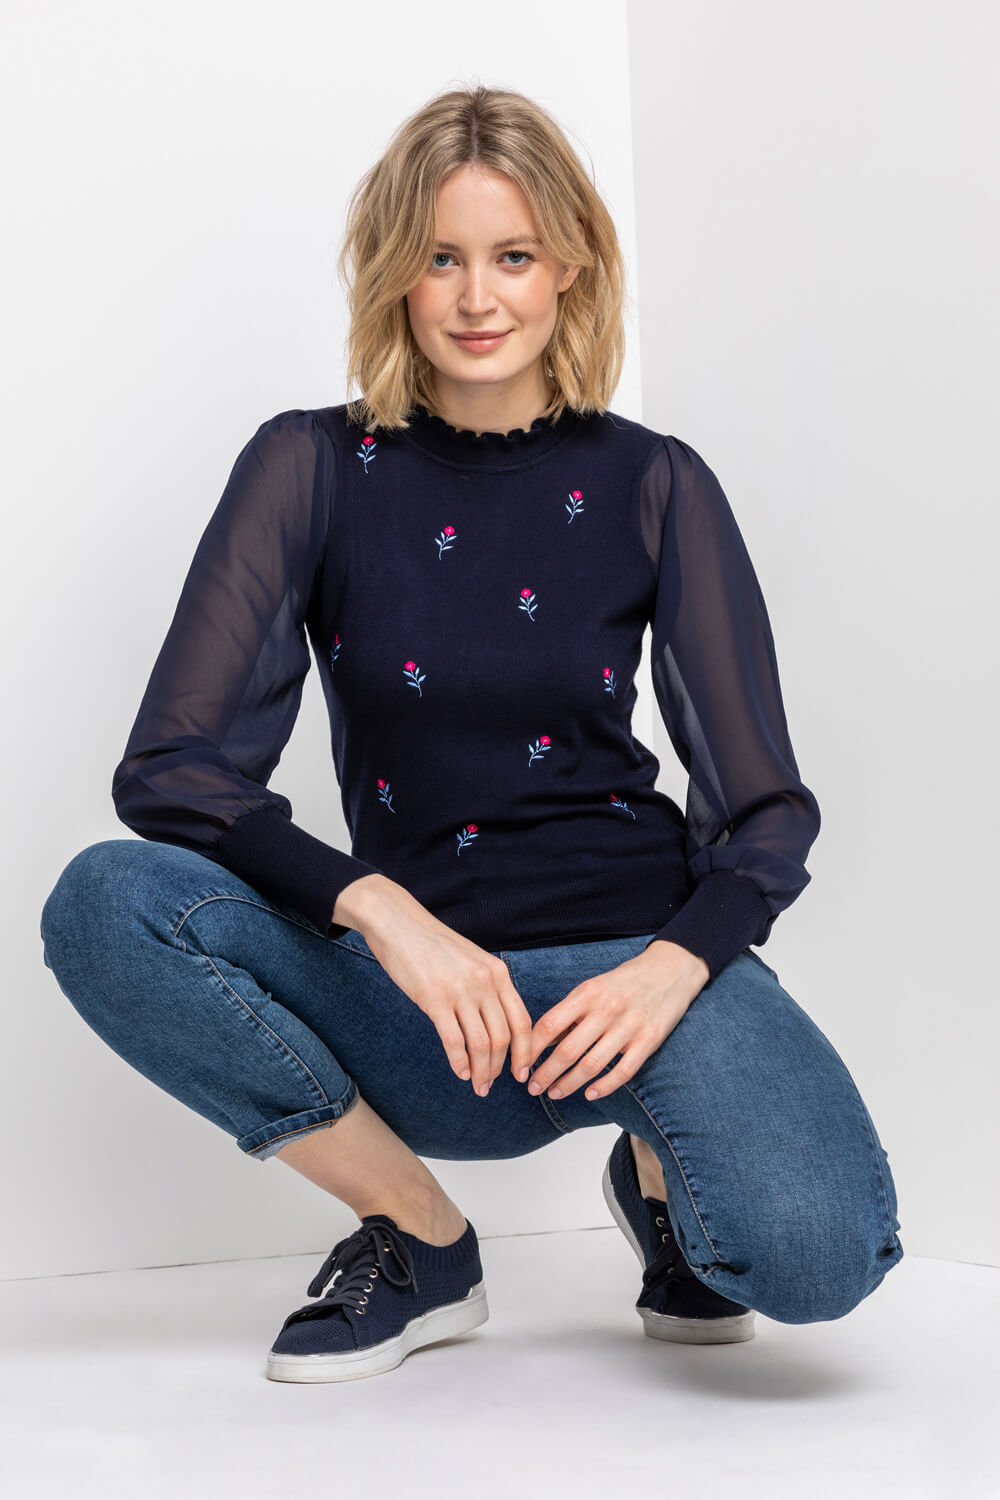 Midnight Blue Floral Embroidered Frill Neck Top, Image 5 of 5